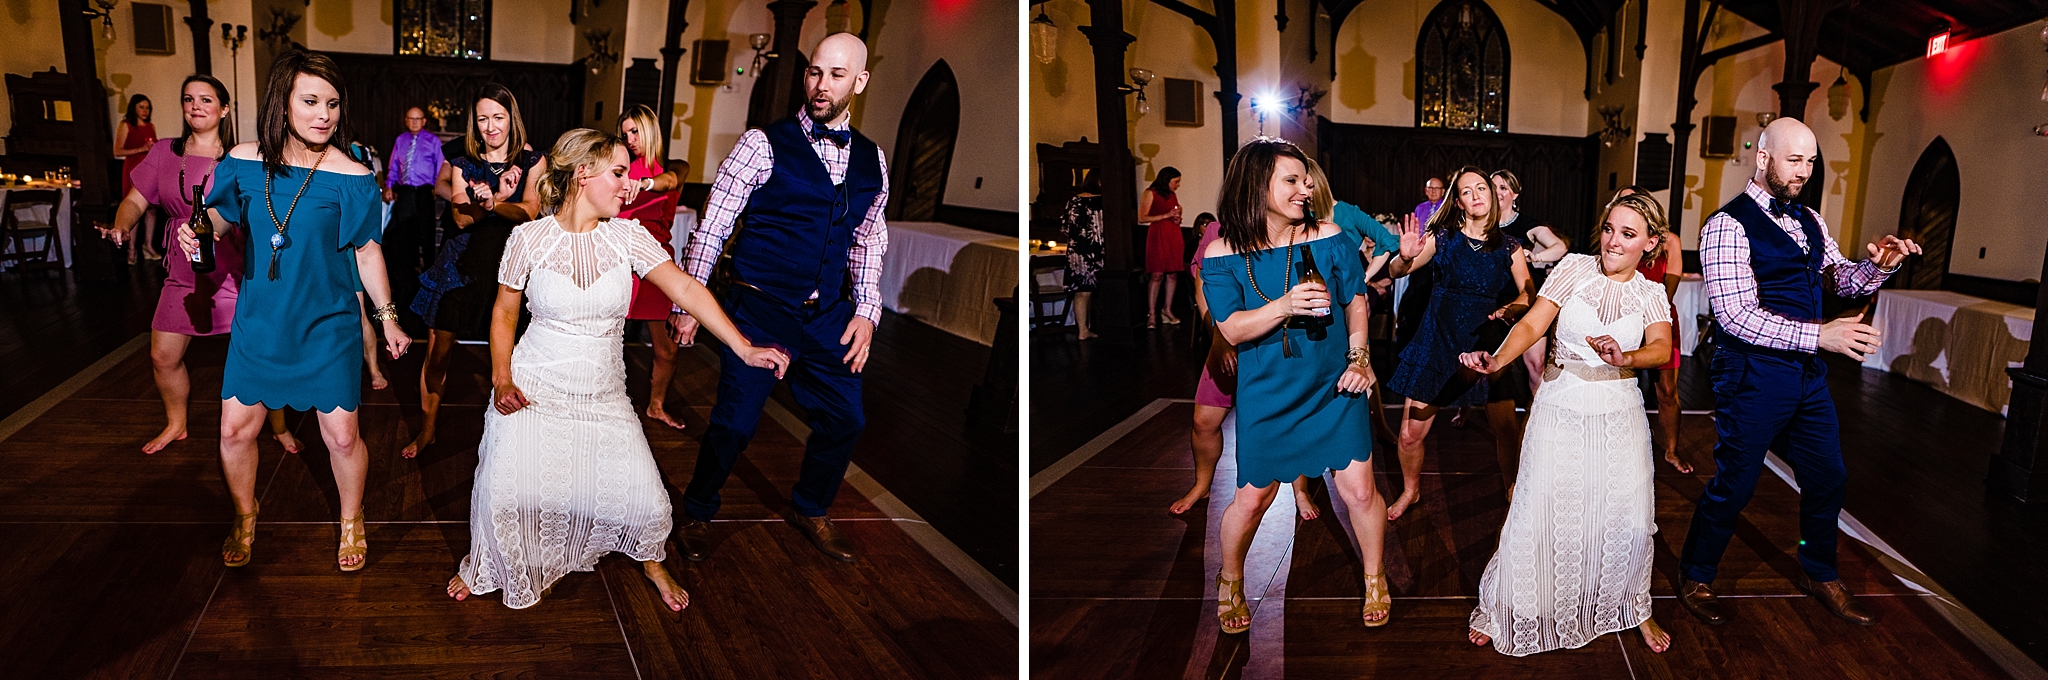 Bride leads The Wobble during a fun wedding reception at All Saints Chapel in downtown Raleigh, NC